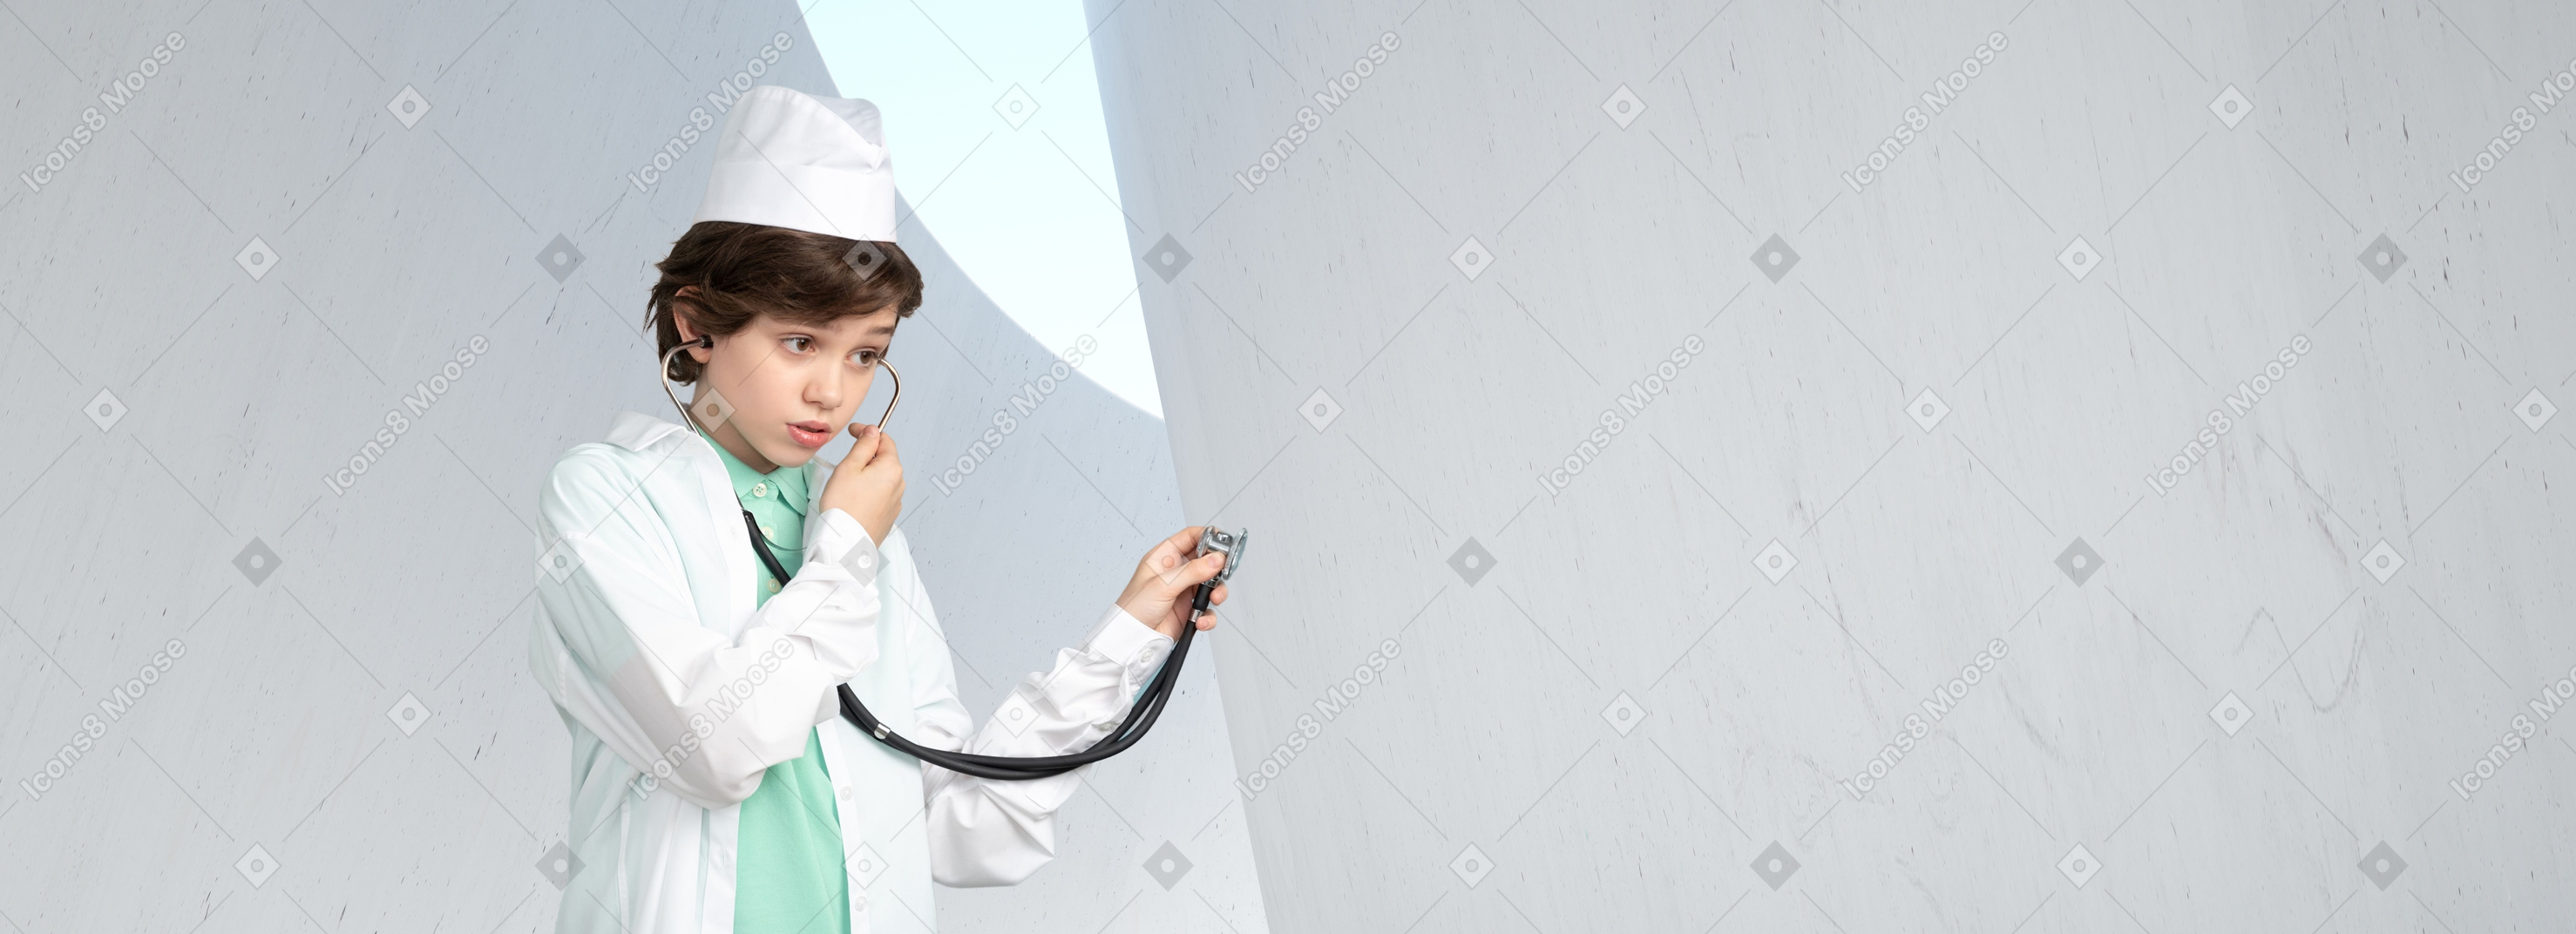 A young boy dressed in a doctor's outfit holding a stethoscope